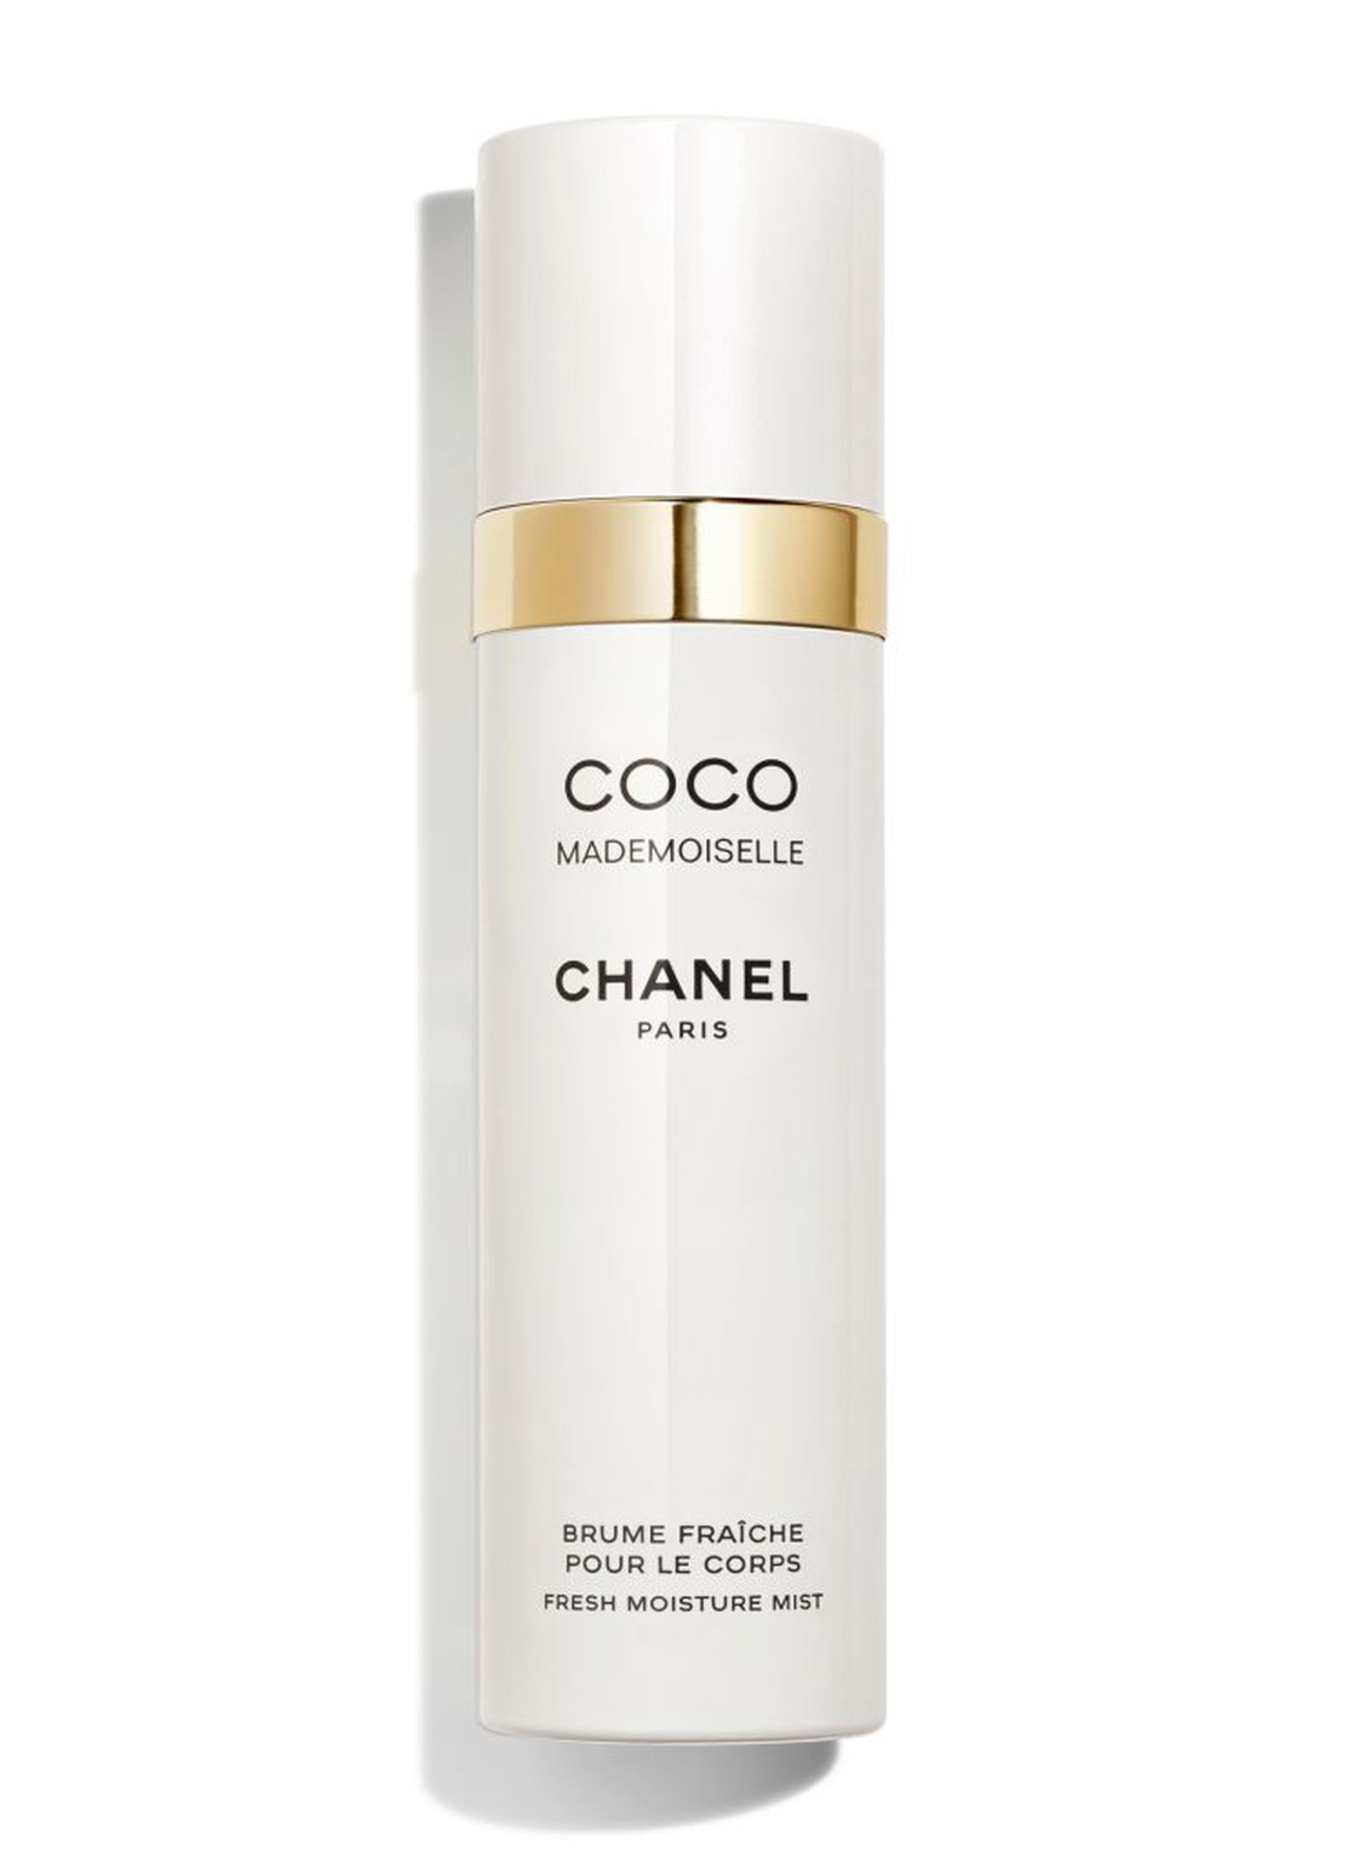 Coco Mademoiselle Moisturizing Body Lotion (Made In USA) 200ml/6.8oz from  Chanel to Germany. CosmoStore Germany